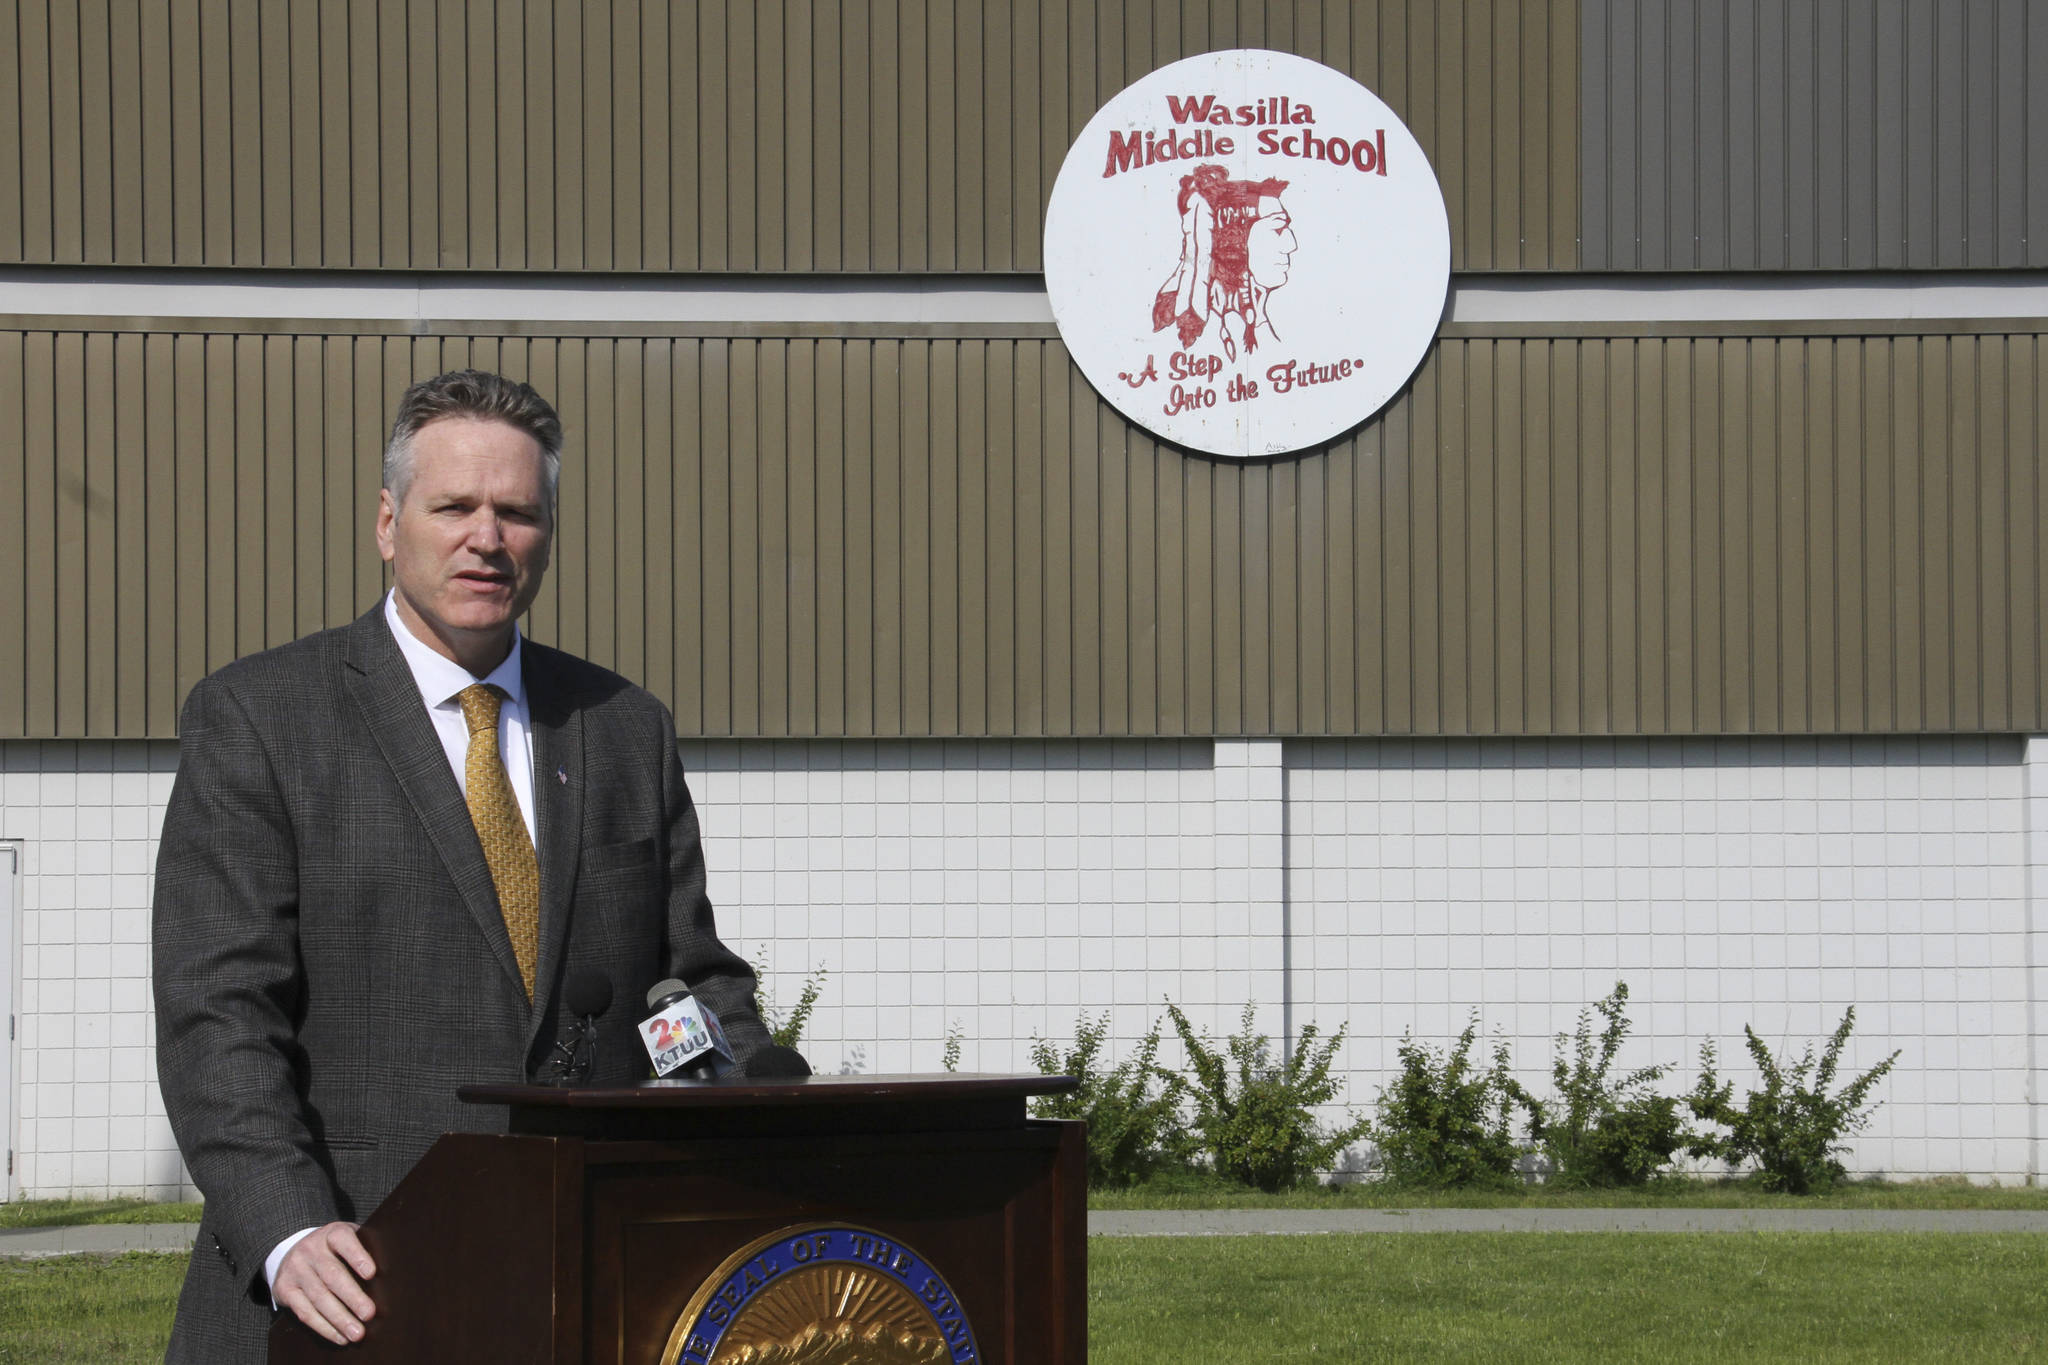 This June 14, 2019, photo shows Alaska Gov. Mike Dunleavy speaking at a news conference at Wasilla Middle School in Wasilla, Alaska. Dunleavy has called lawmakers into special session in Wasilla beginning July 8, but some lawmakers have expressed concerns over security and logistics with the location more than 500 miles from the state capital of Juneau, Alaska. (AP Photo/Mark Thiessen)